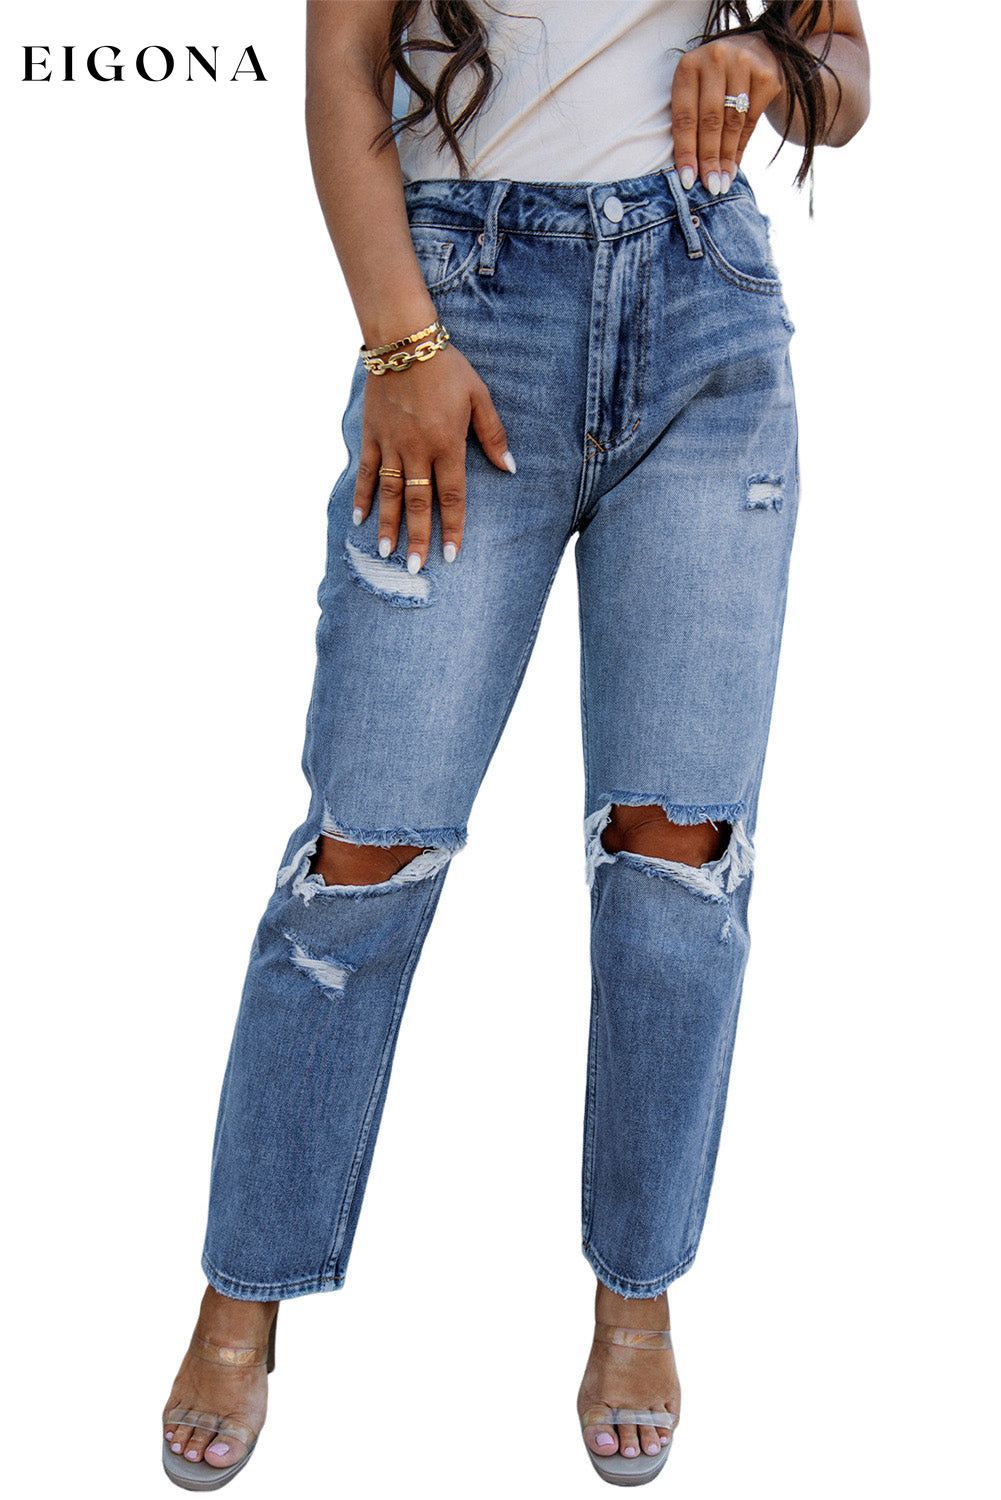 Sky Blue Open Knee Cutout Straight Leg Jeans All In Stock Best Sellers bottoms clothes Color Blue Craft Distressed Early Fall Collection Fabric Denim Hot picks Occasion Daily pants ripped knee Season Spring Style Casual